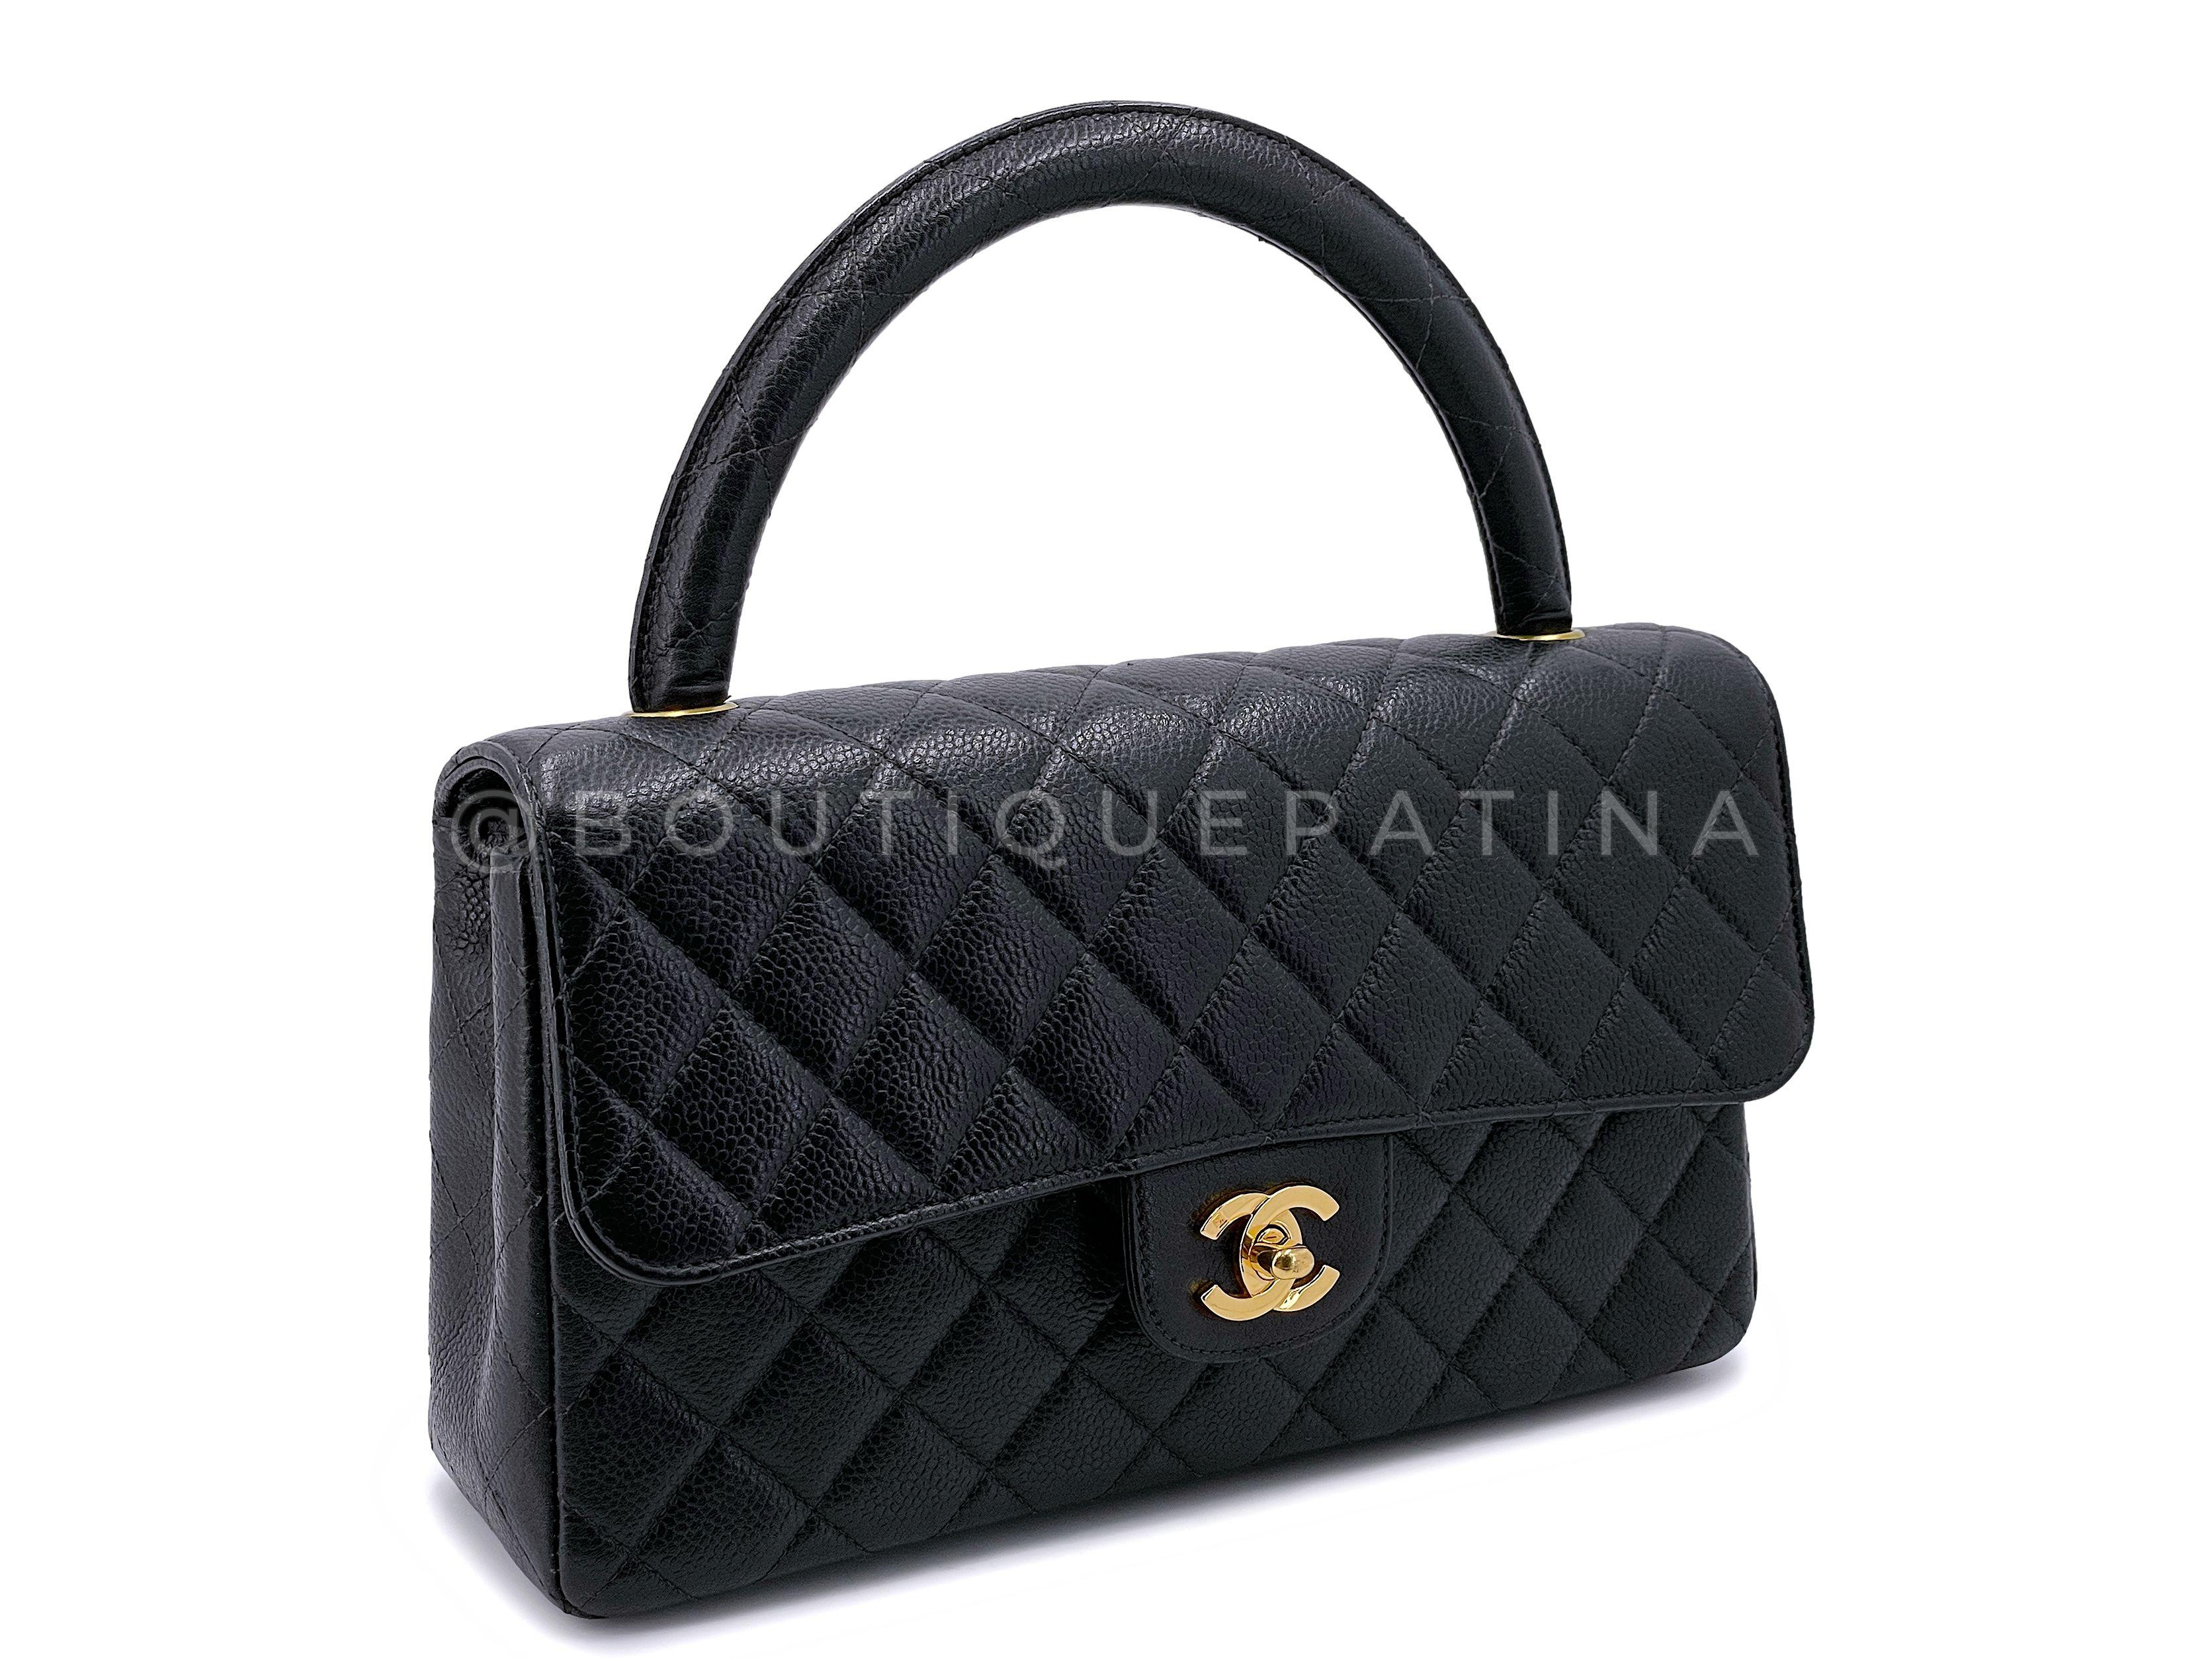 Store item: 67702
We've never had this specific model in this specific material/color combo listed on Boutique Patina - and this says a lot, given we have been selling pristine vintage Chanel for 20 years. The only other one we have seen is the one